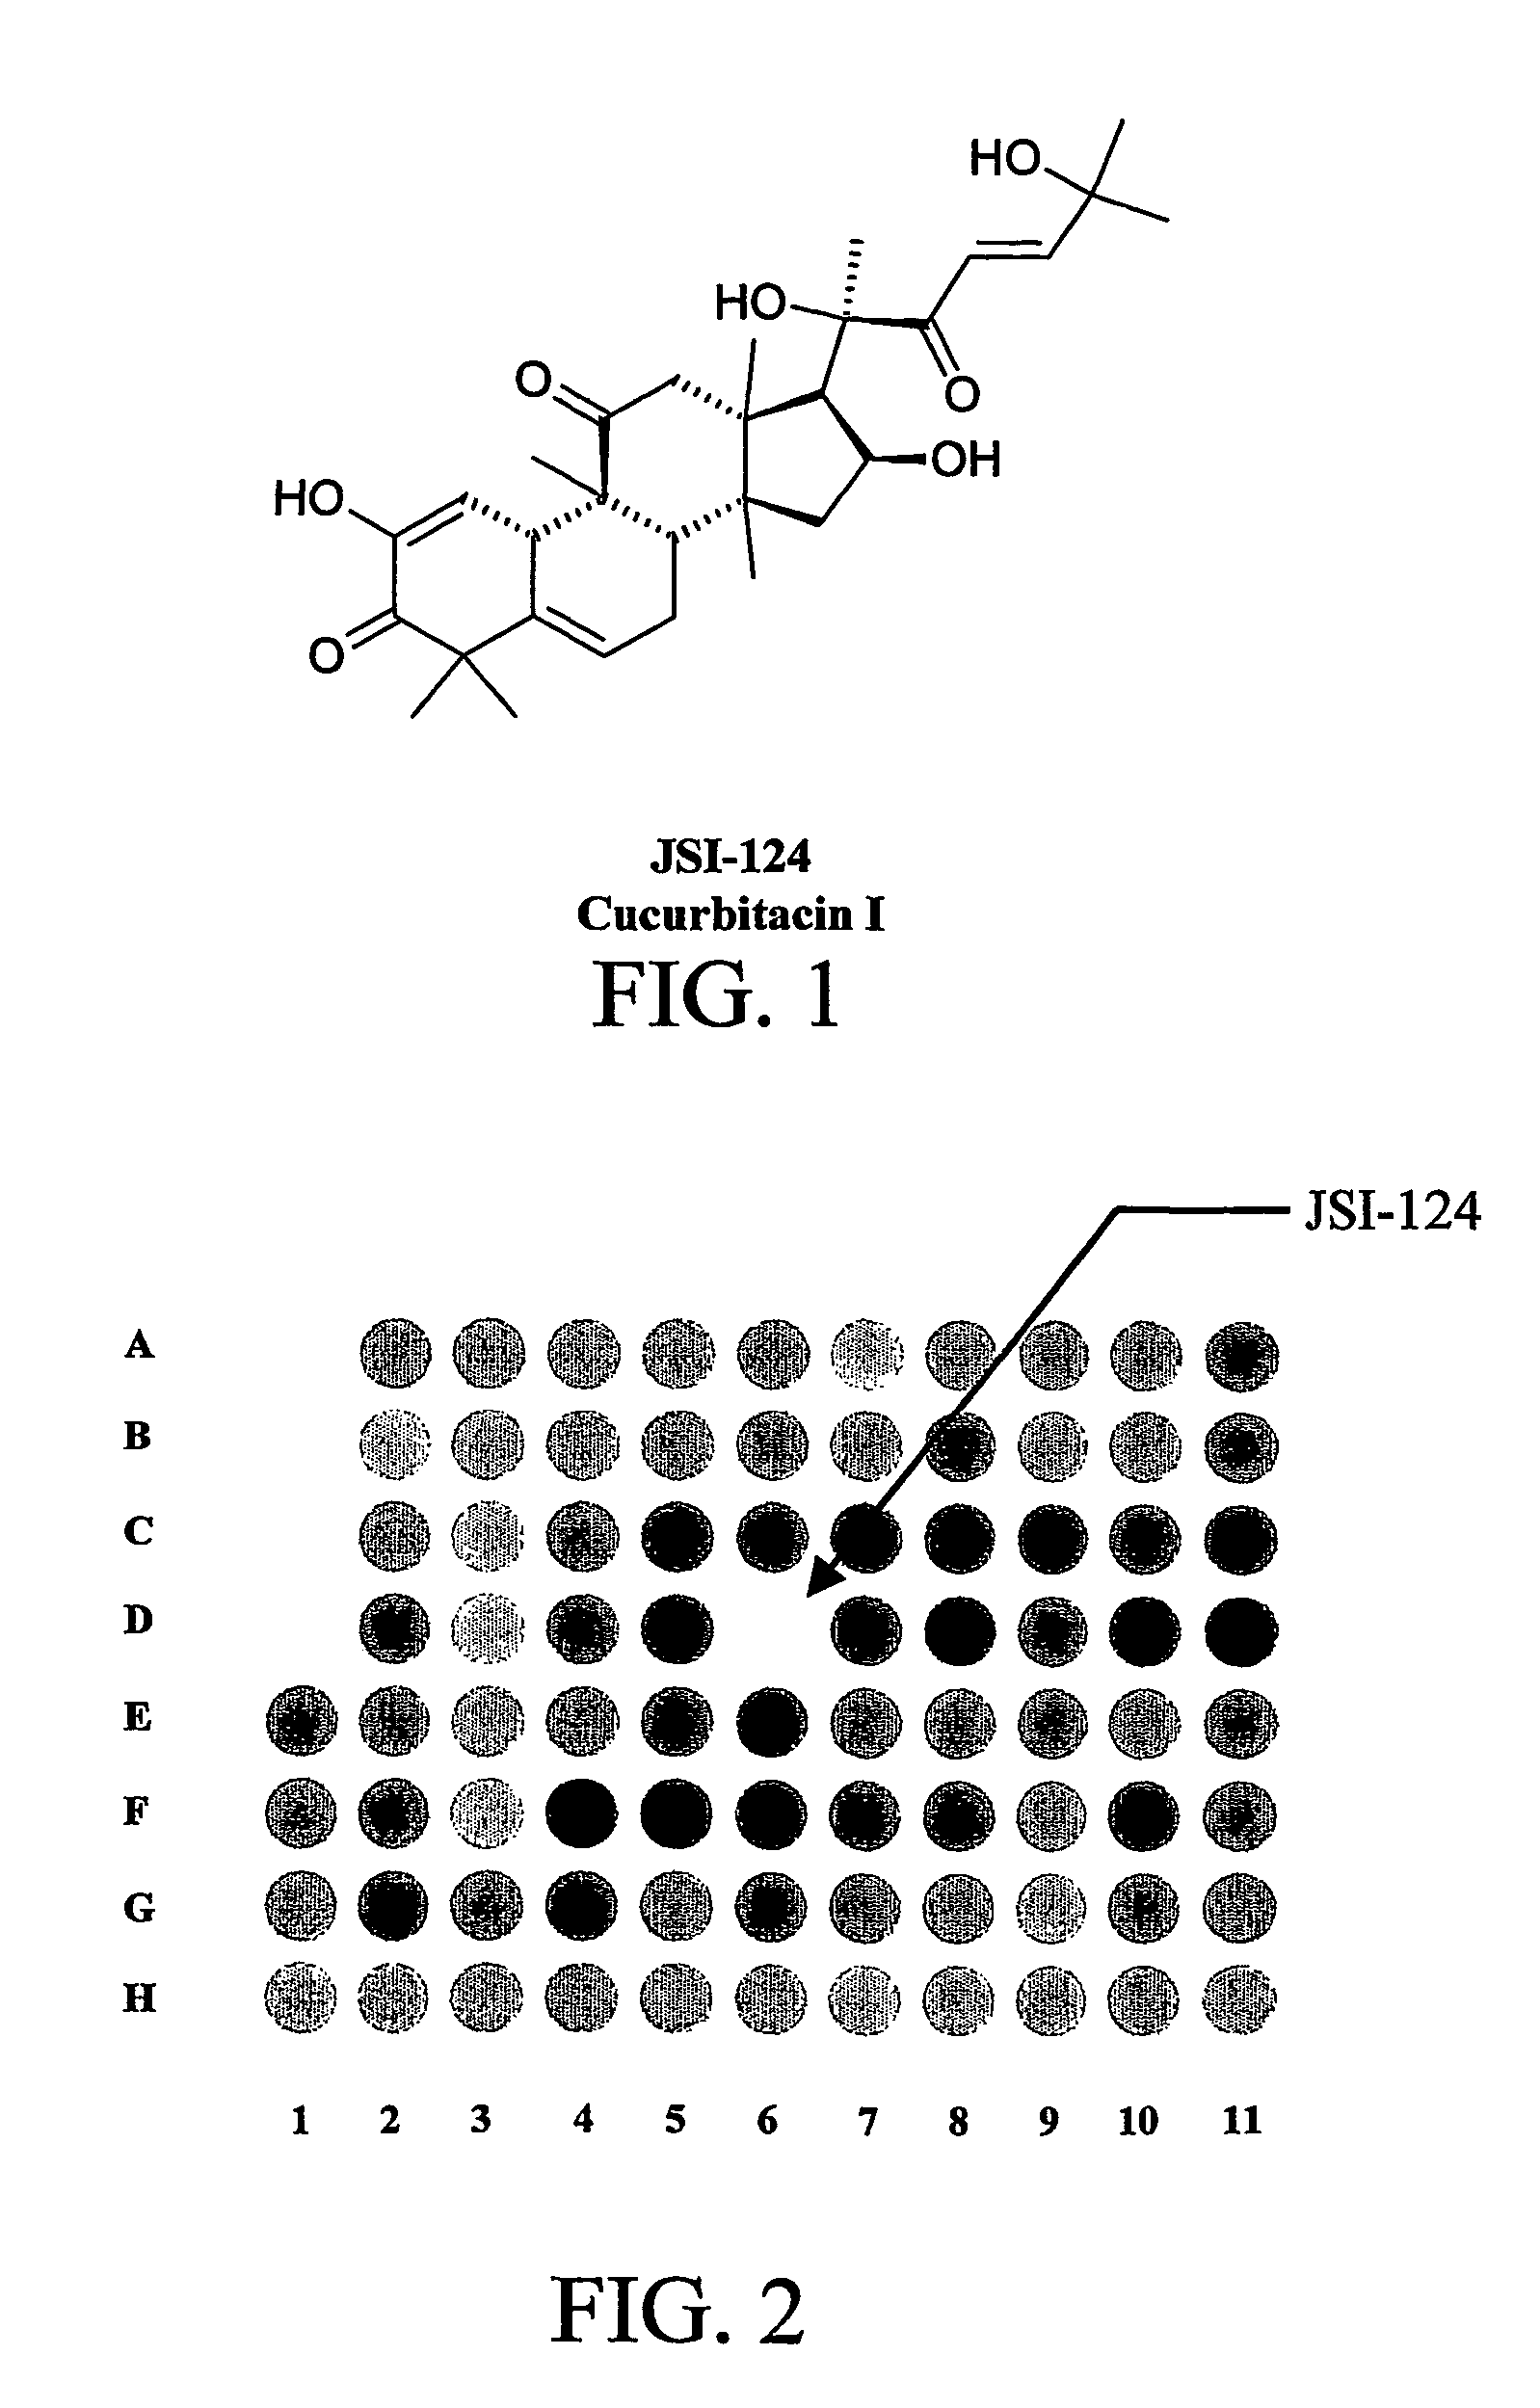 Materials and methods for treatment of cancer and identification of anti-cancer compounds